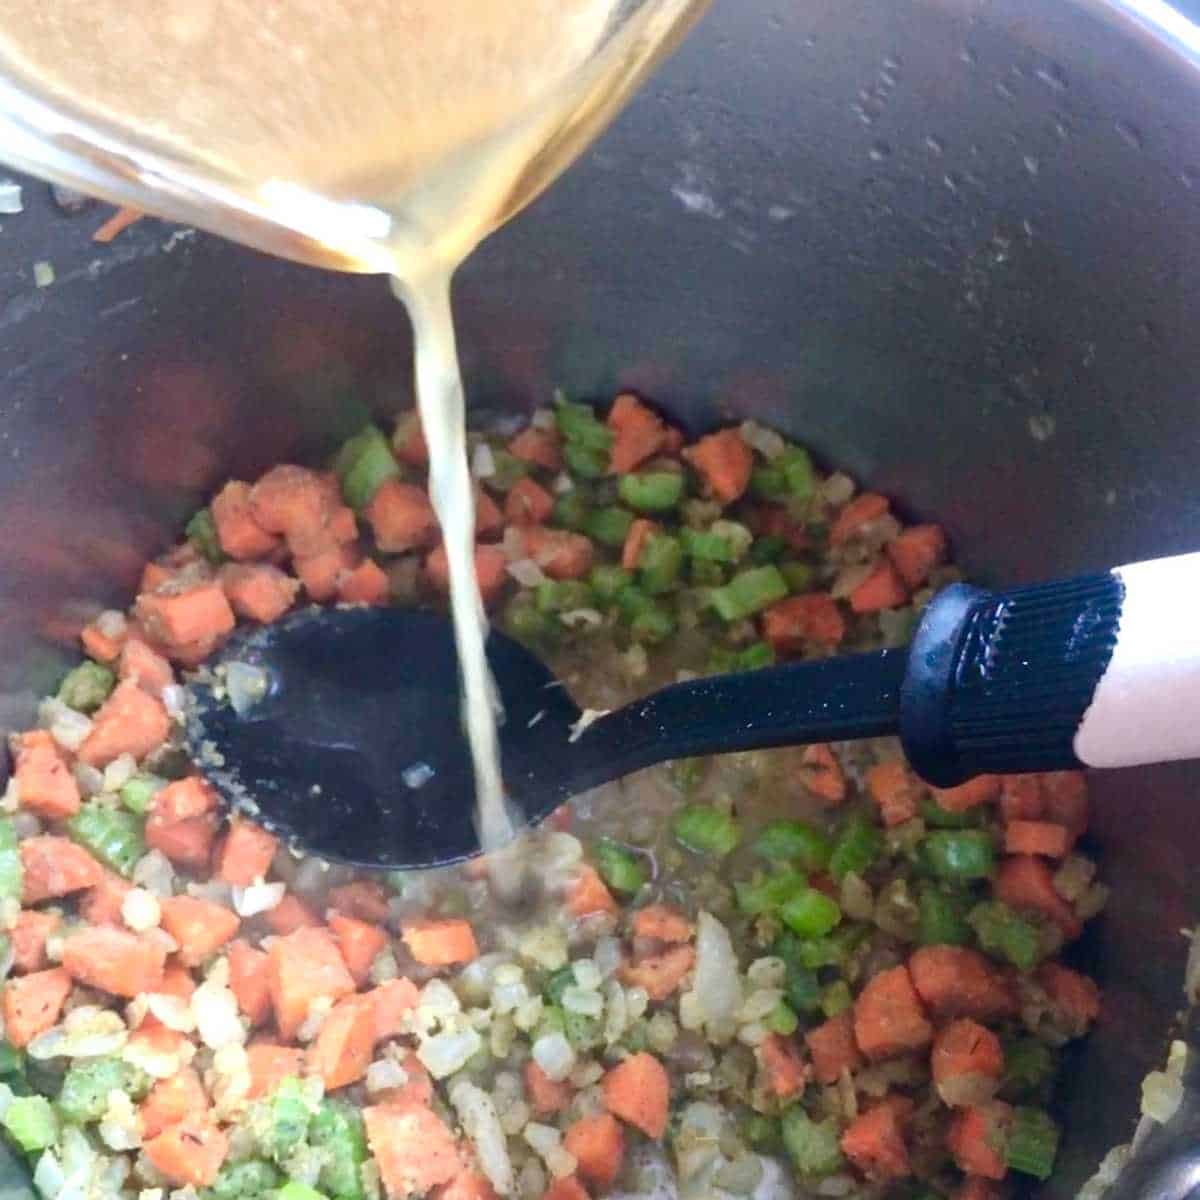 Chicken broth and dairy free milk being poured over vegetables coated in gluten free flour